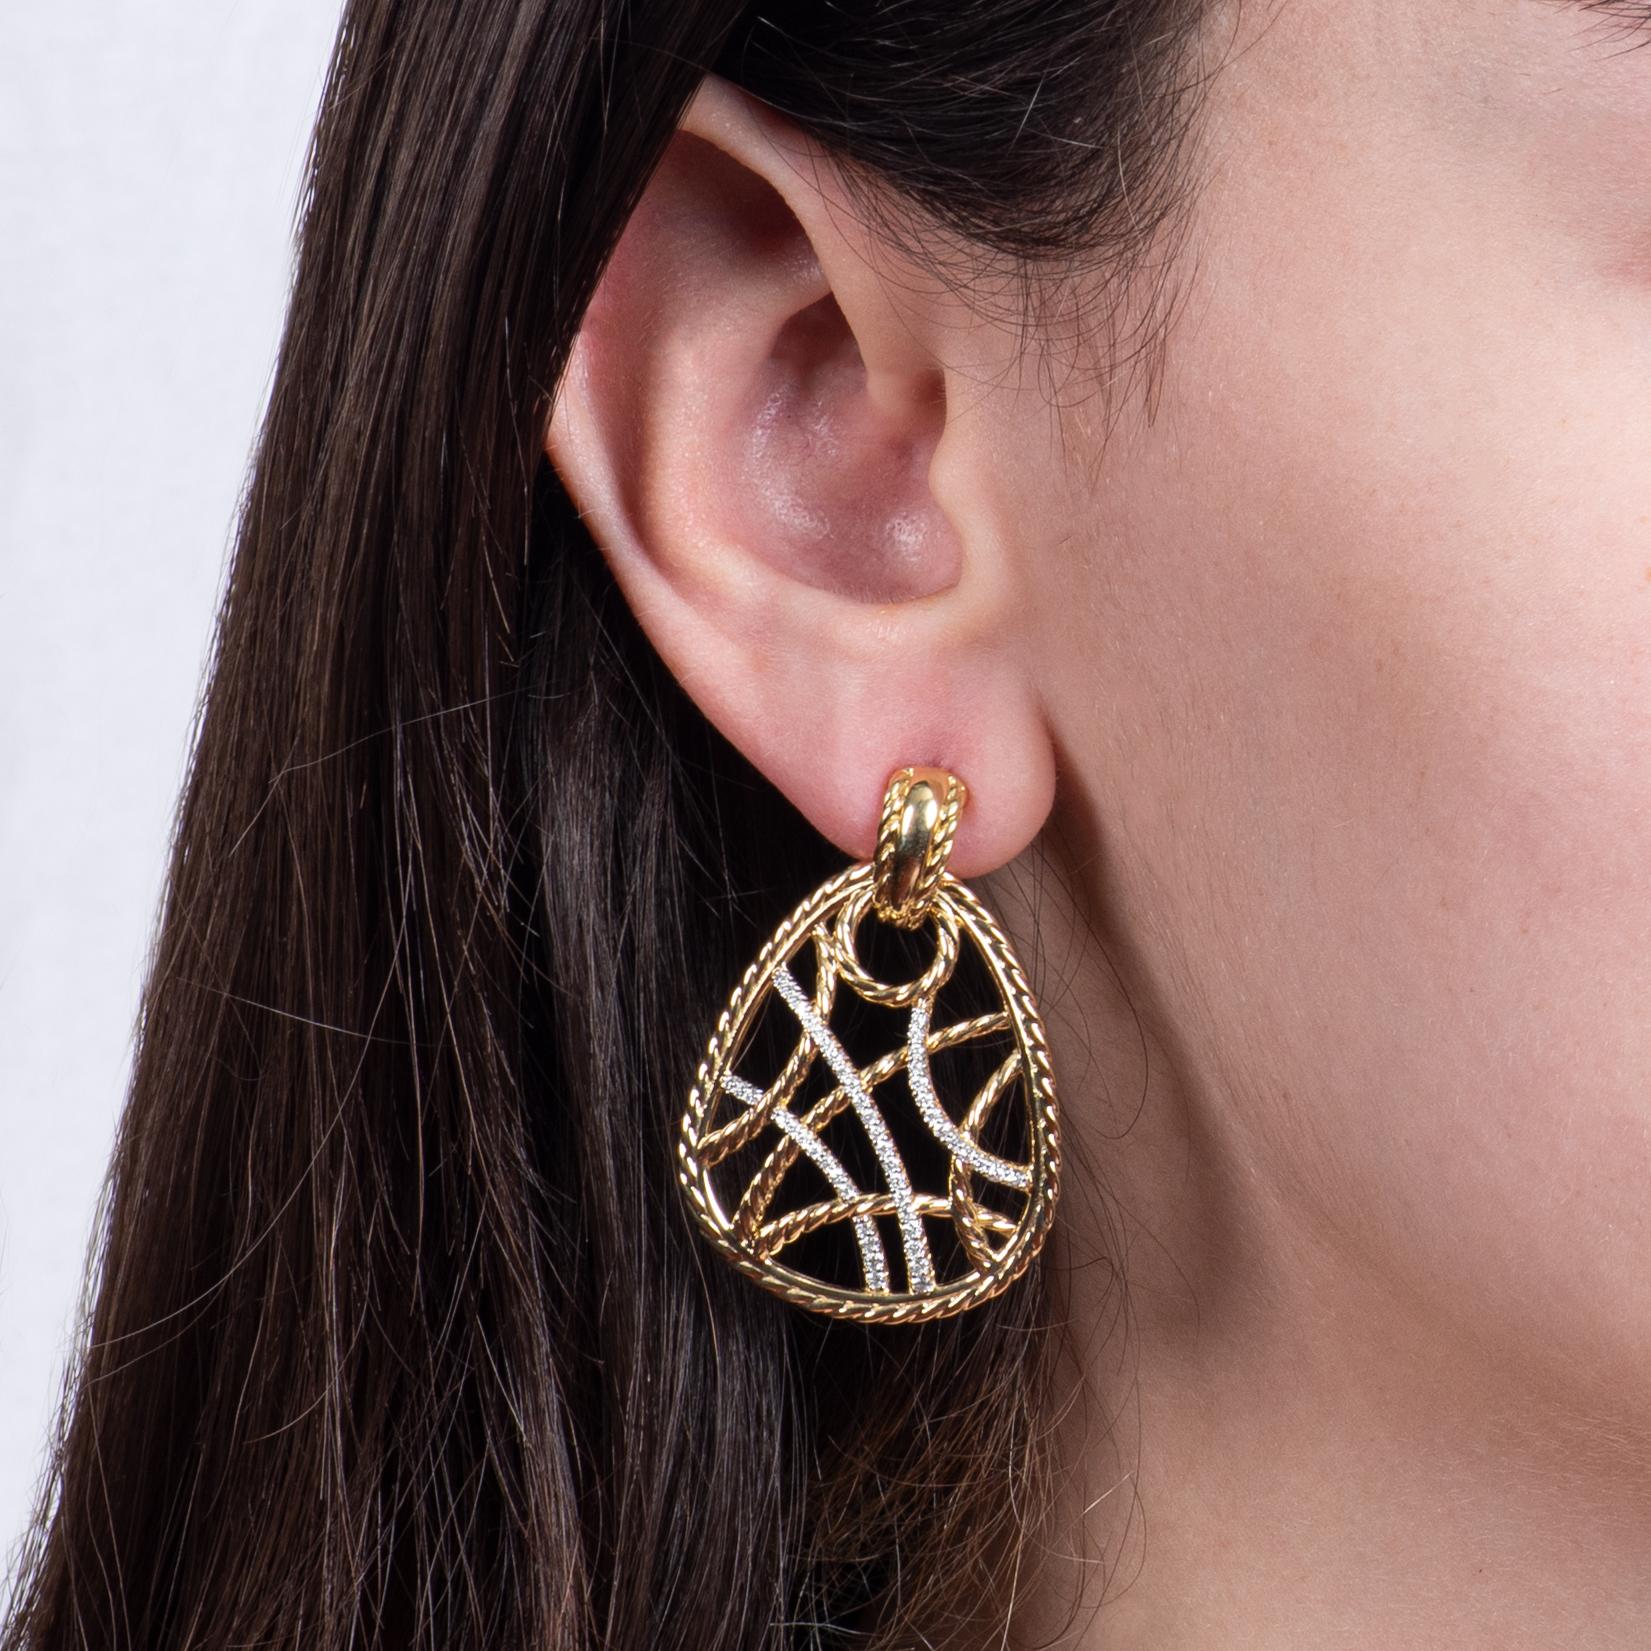 These David Yurman drop earrings have a pear shaped 18kt yellow gold form, with intricate, intertwining cable ropes along the inside of the form. It features 1.00ct total weight in round diamonds decorating some of the ropes. We currently have the